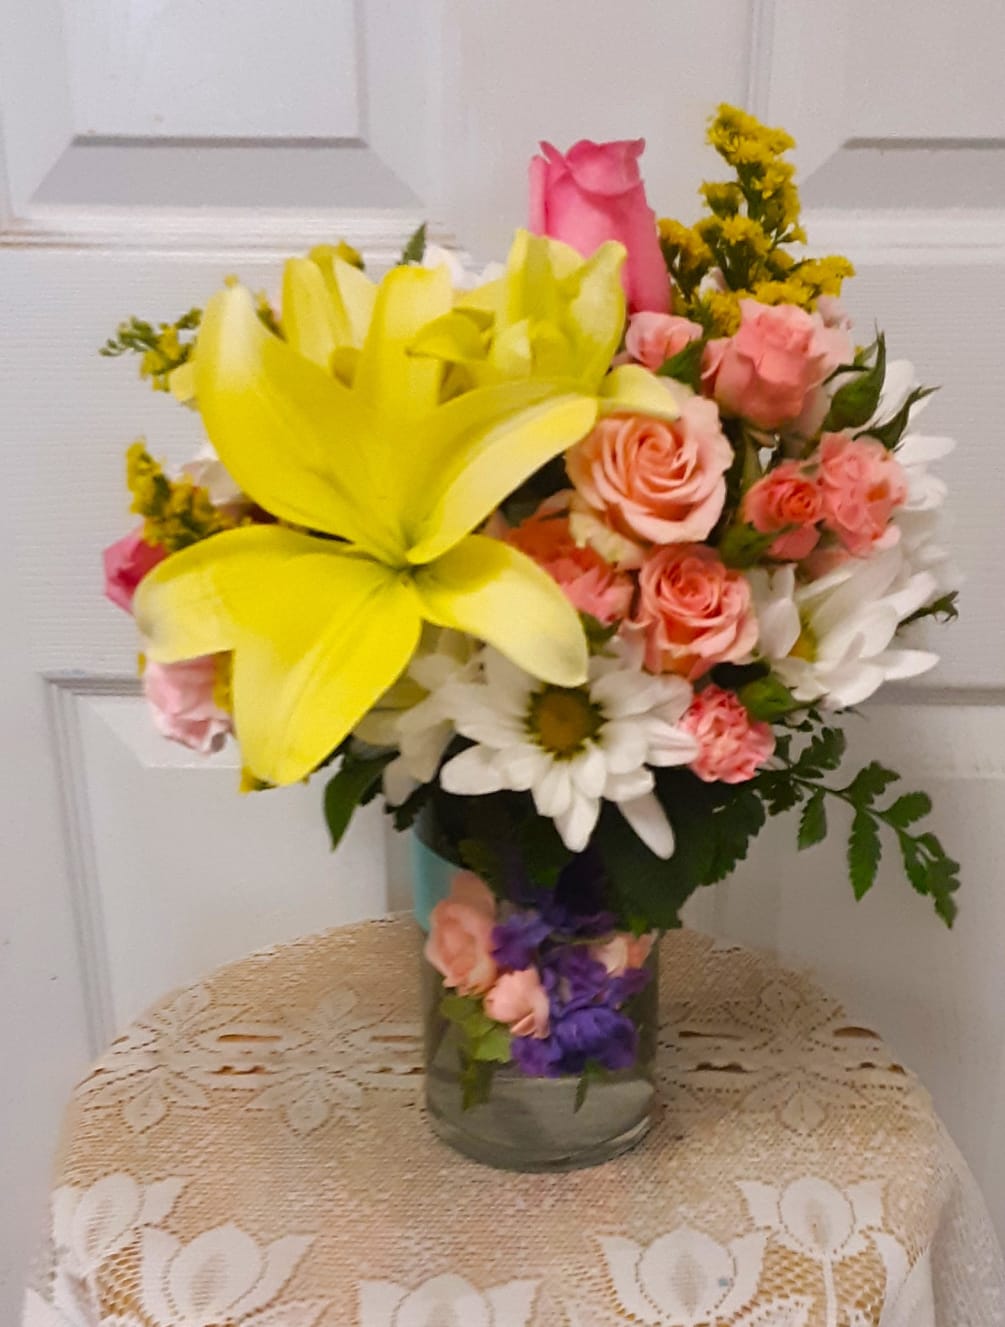 A perfect arrangement to express happiness! Any occasion for these flowers would